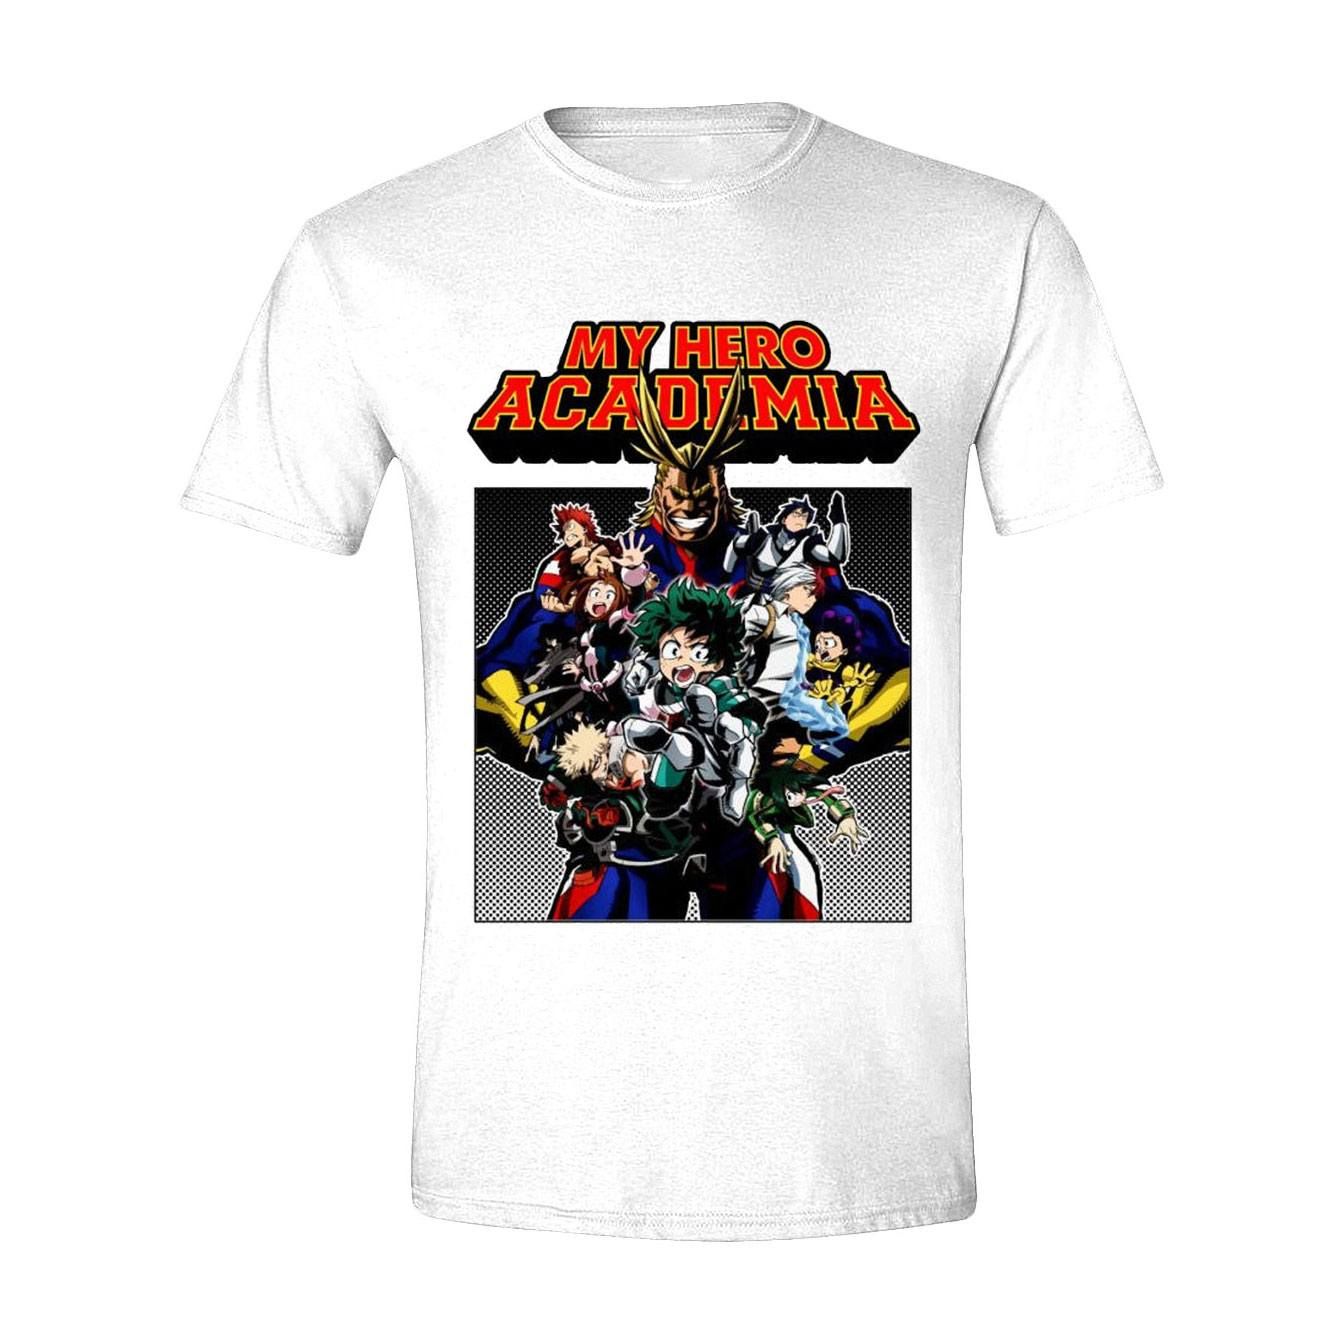 My Hero Academia T-Shirt Poster Shot Size S PCMerch